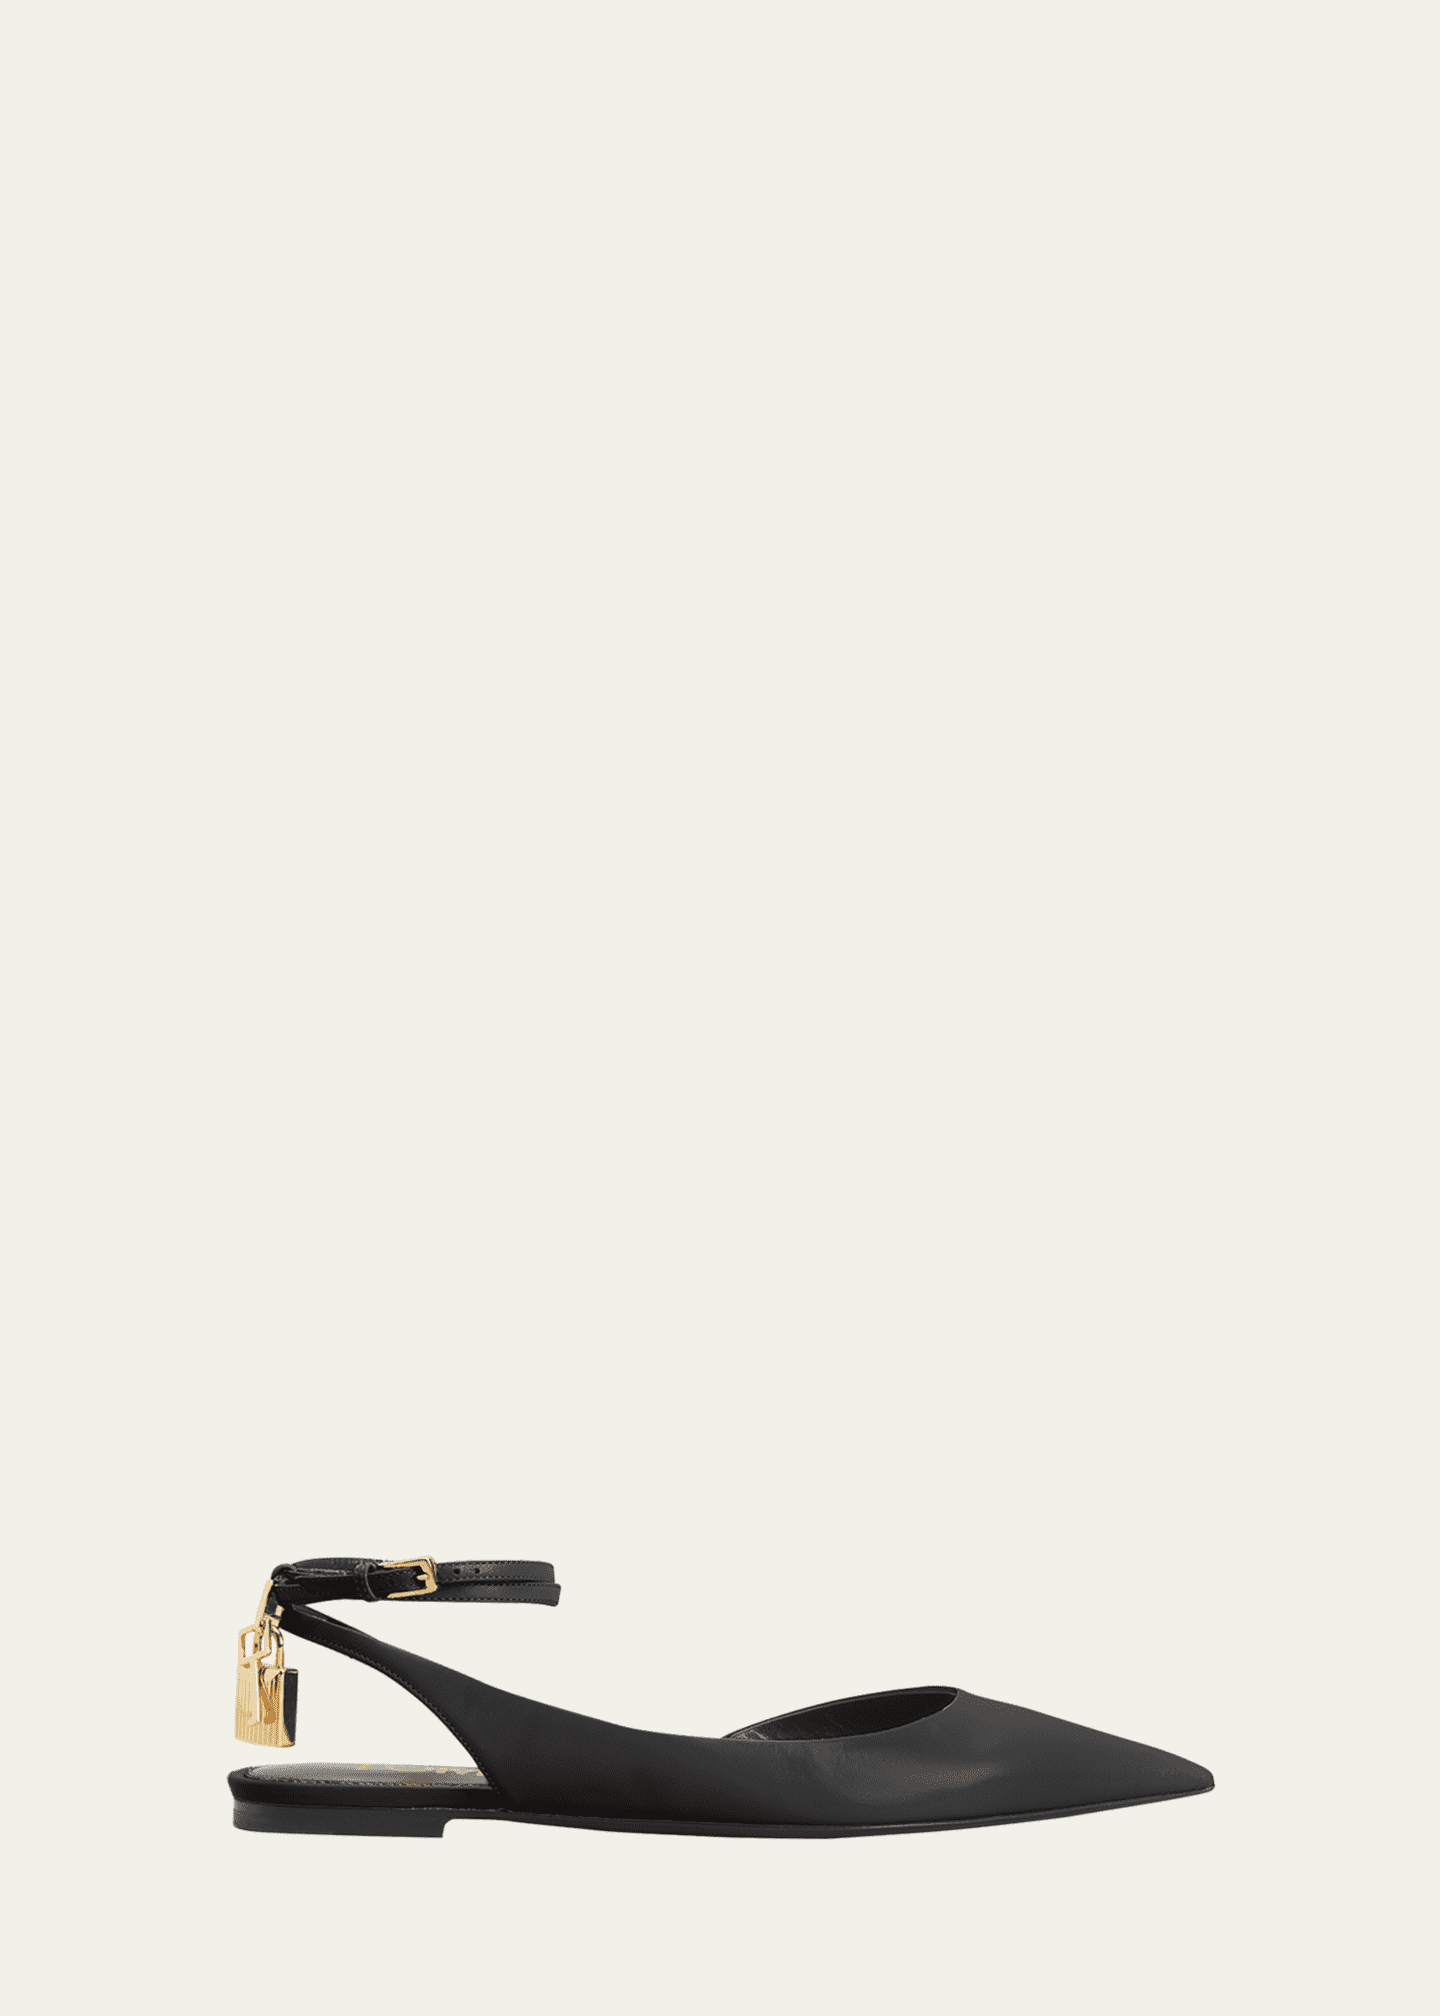 TOM FORD Leather Ankle-Strap Ballerina Flats - Bergdorf Goodman